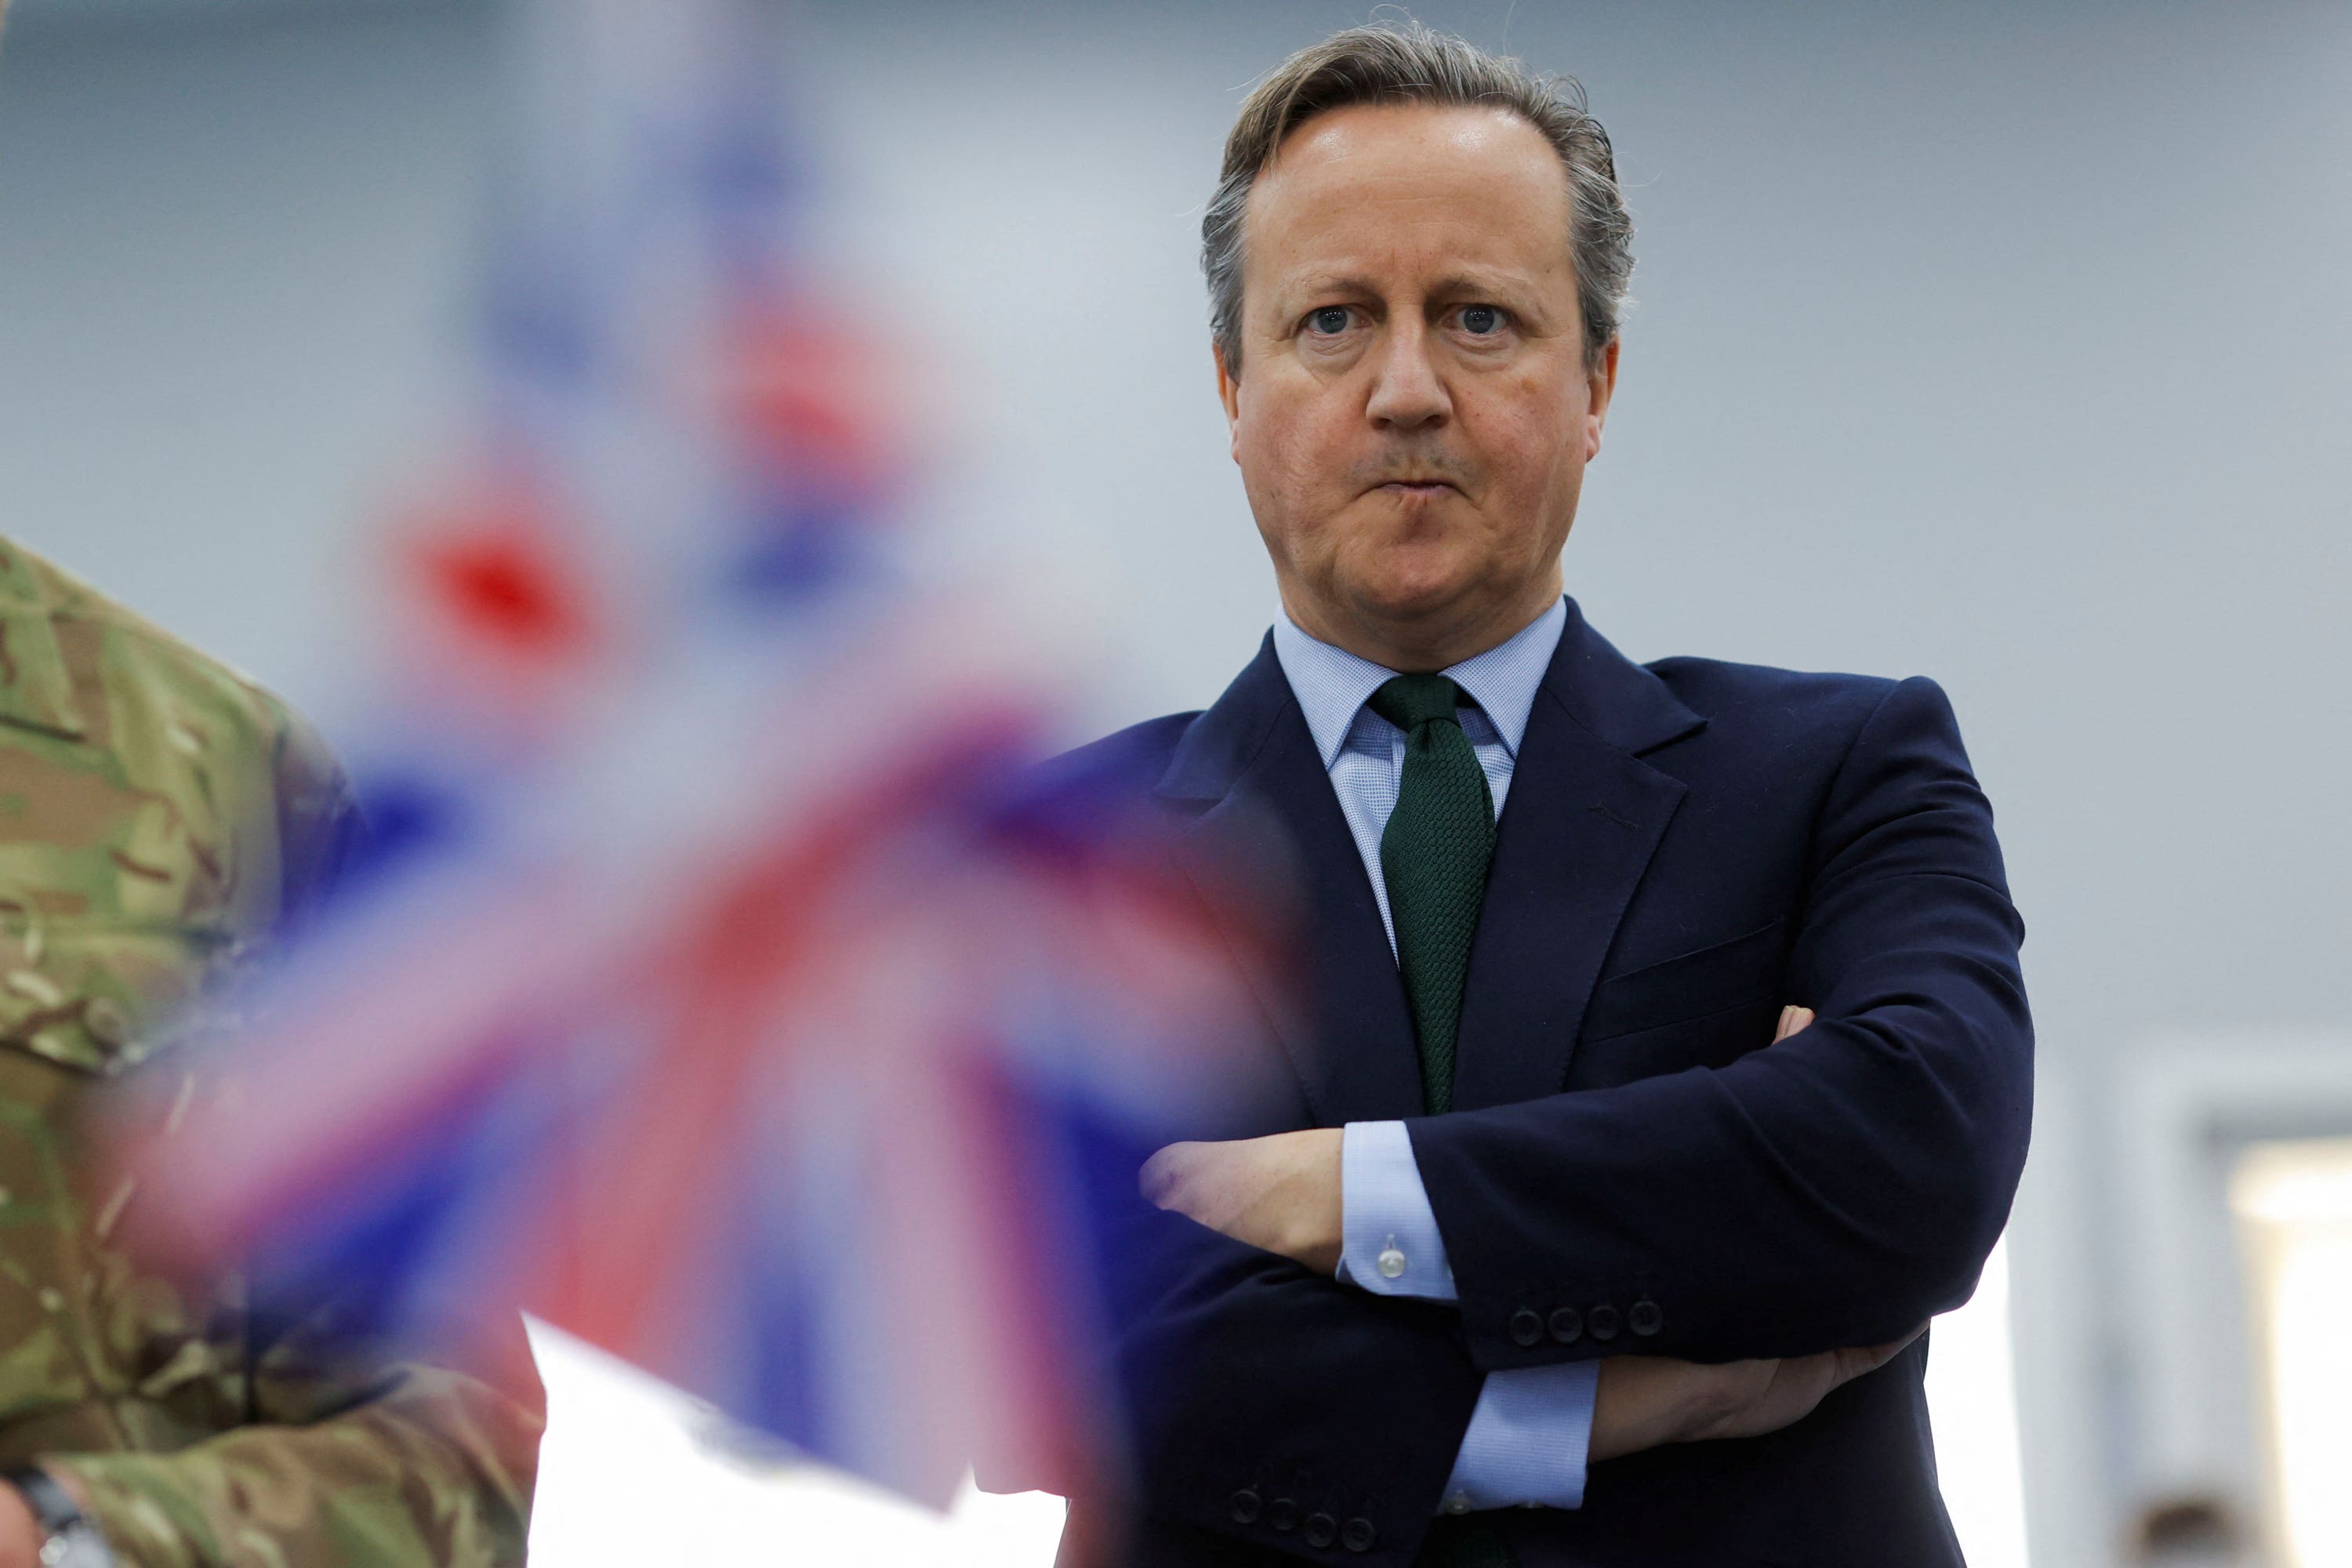 Lord David Cameron hinted further strikes could follow if the Houthis continue their attacks (Valdrin Xhemaj/PA)